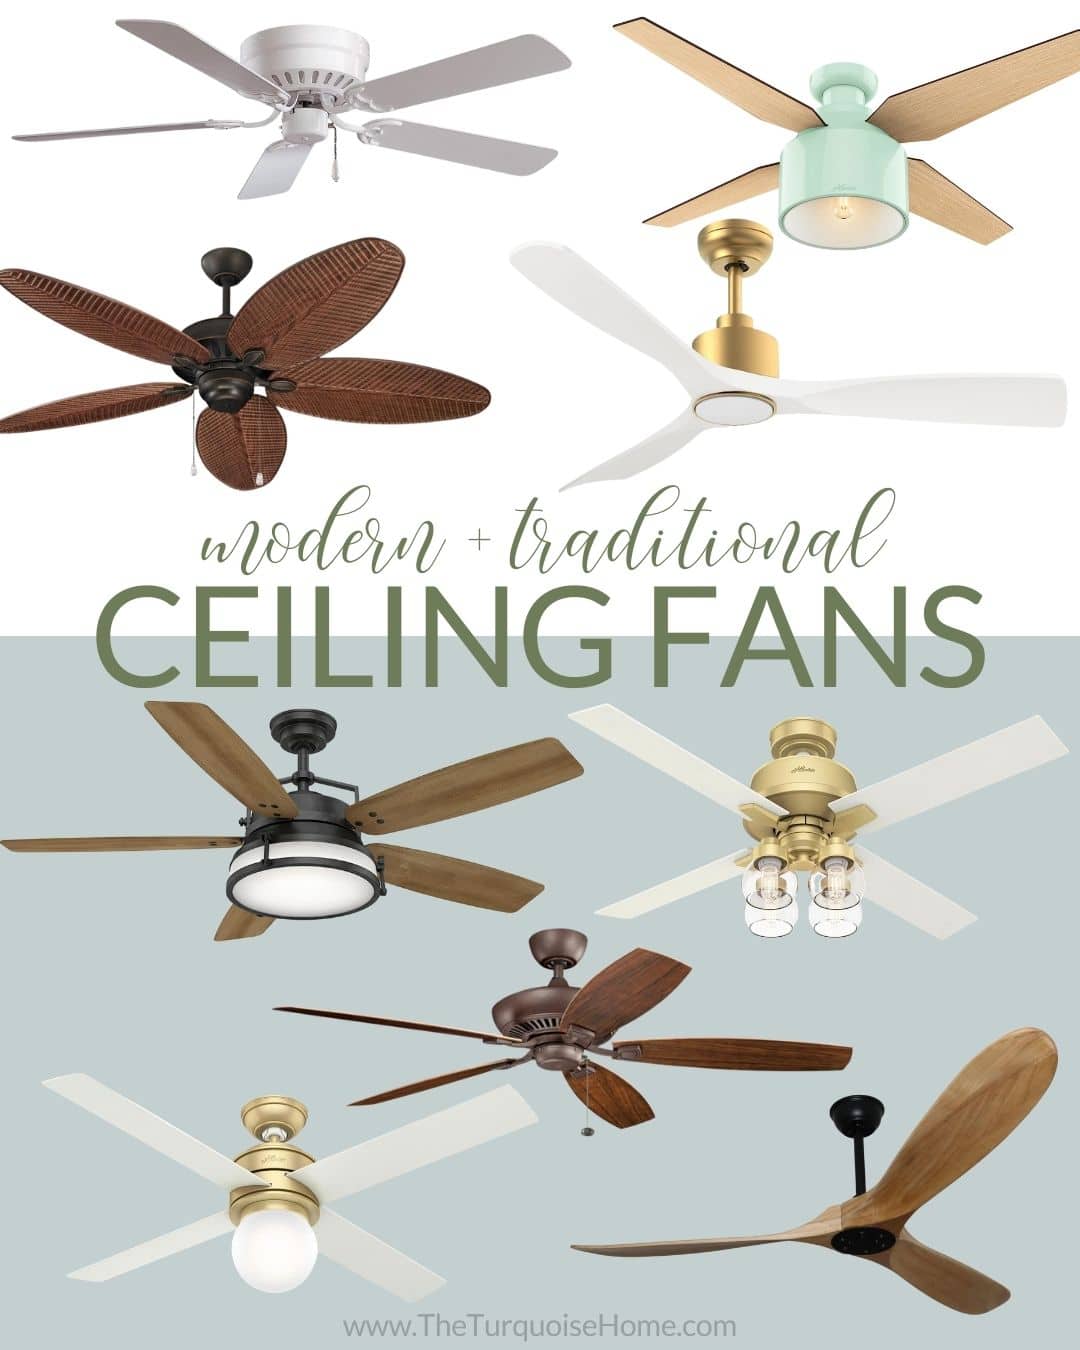 15 Best Ceiling Fans for the Stylish Home